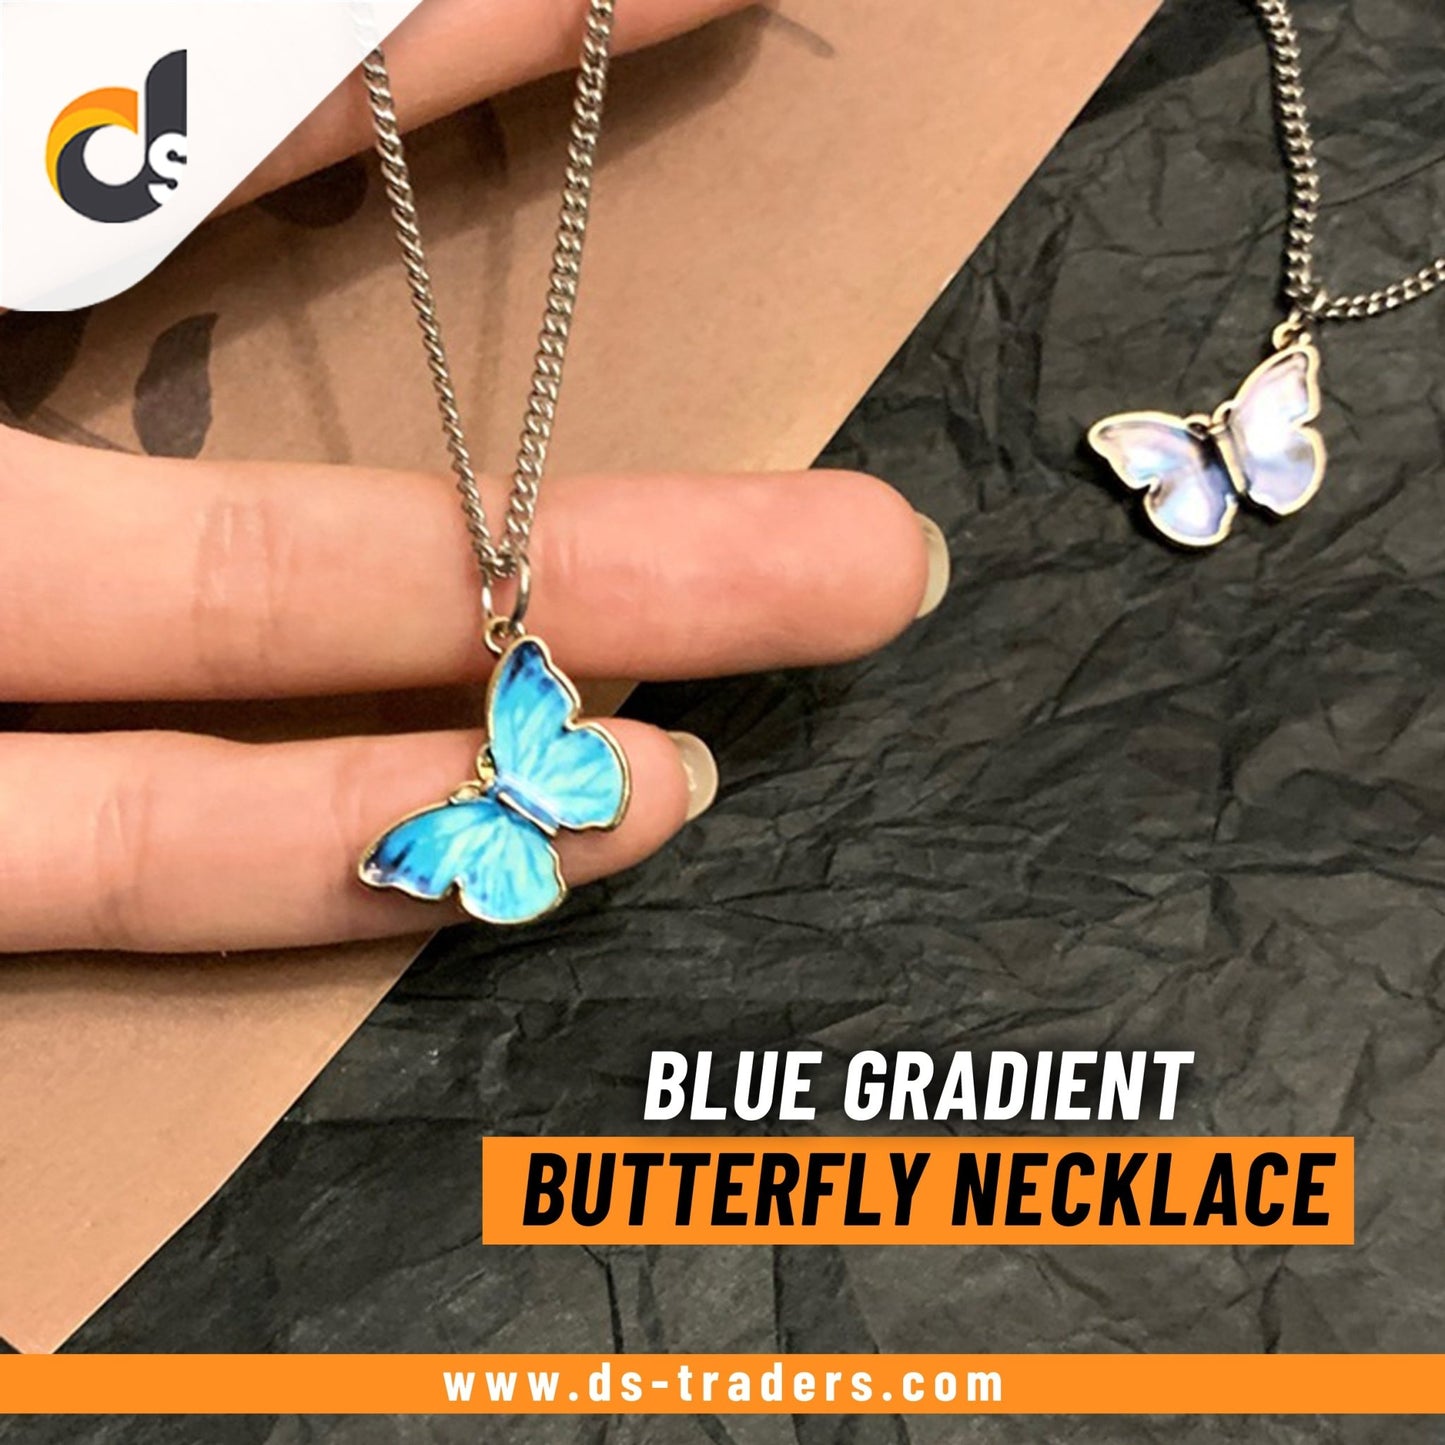 Blue Gradient Butterfly Necklace - DS Traders